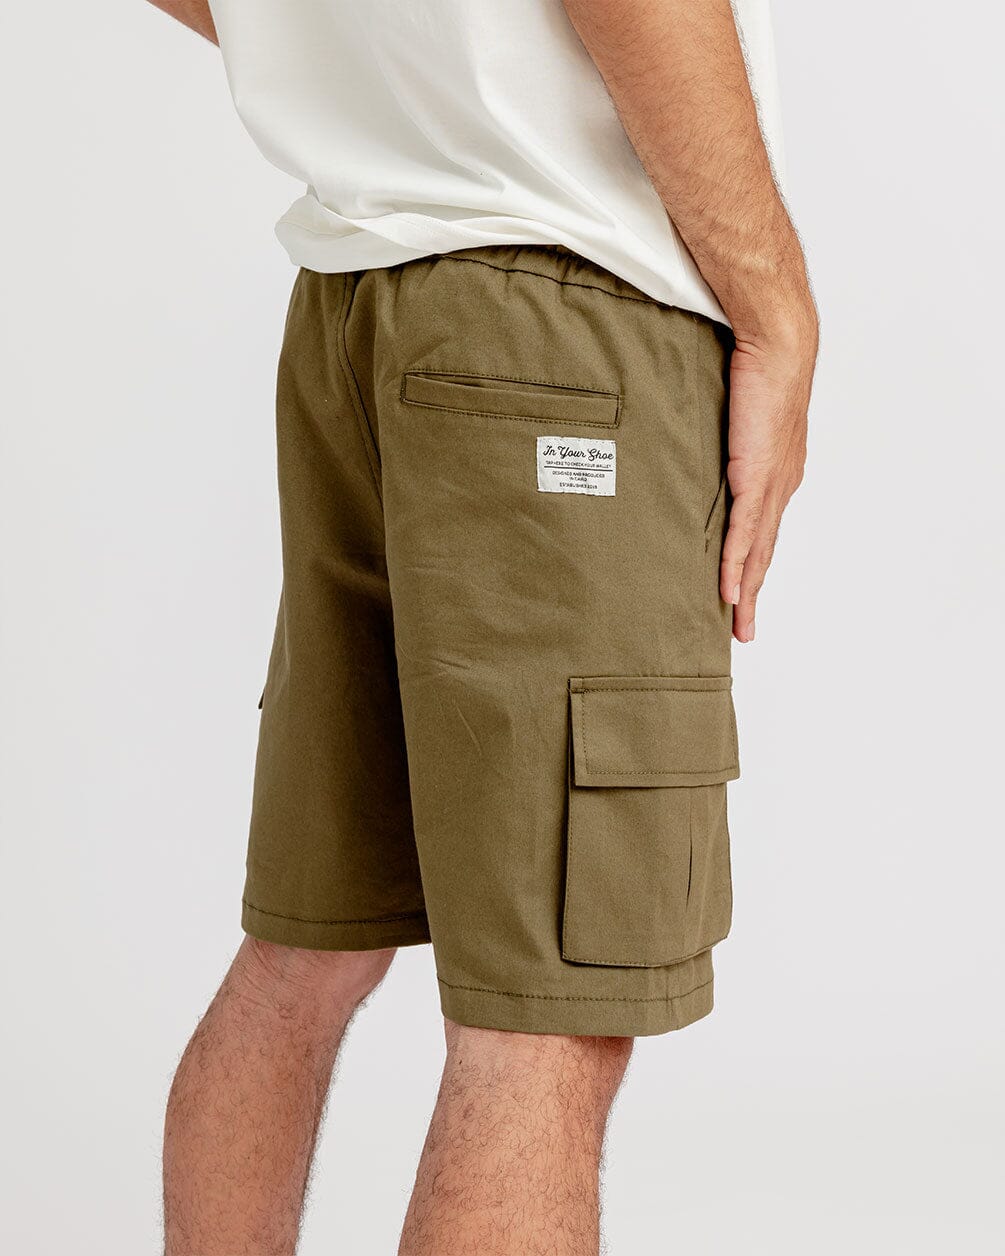 Olive Green Cargo Short Cargo Shorts IN YOUR SHOE 